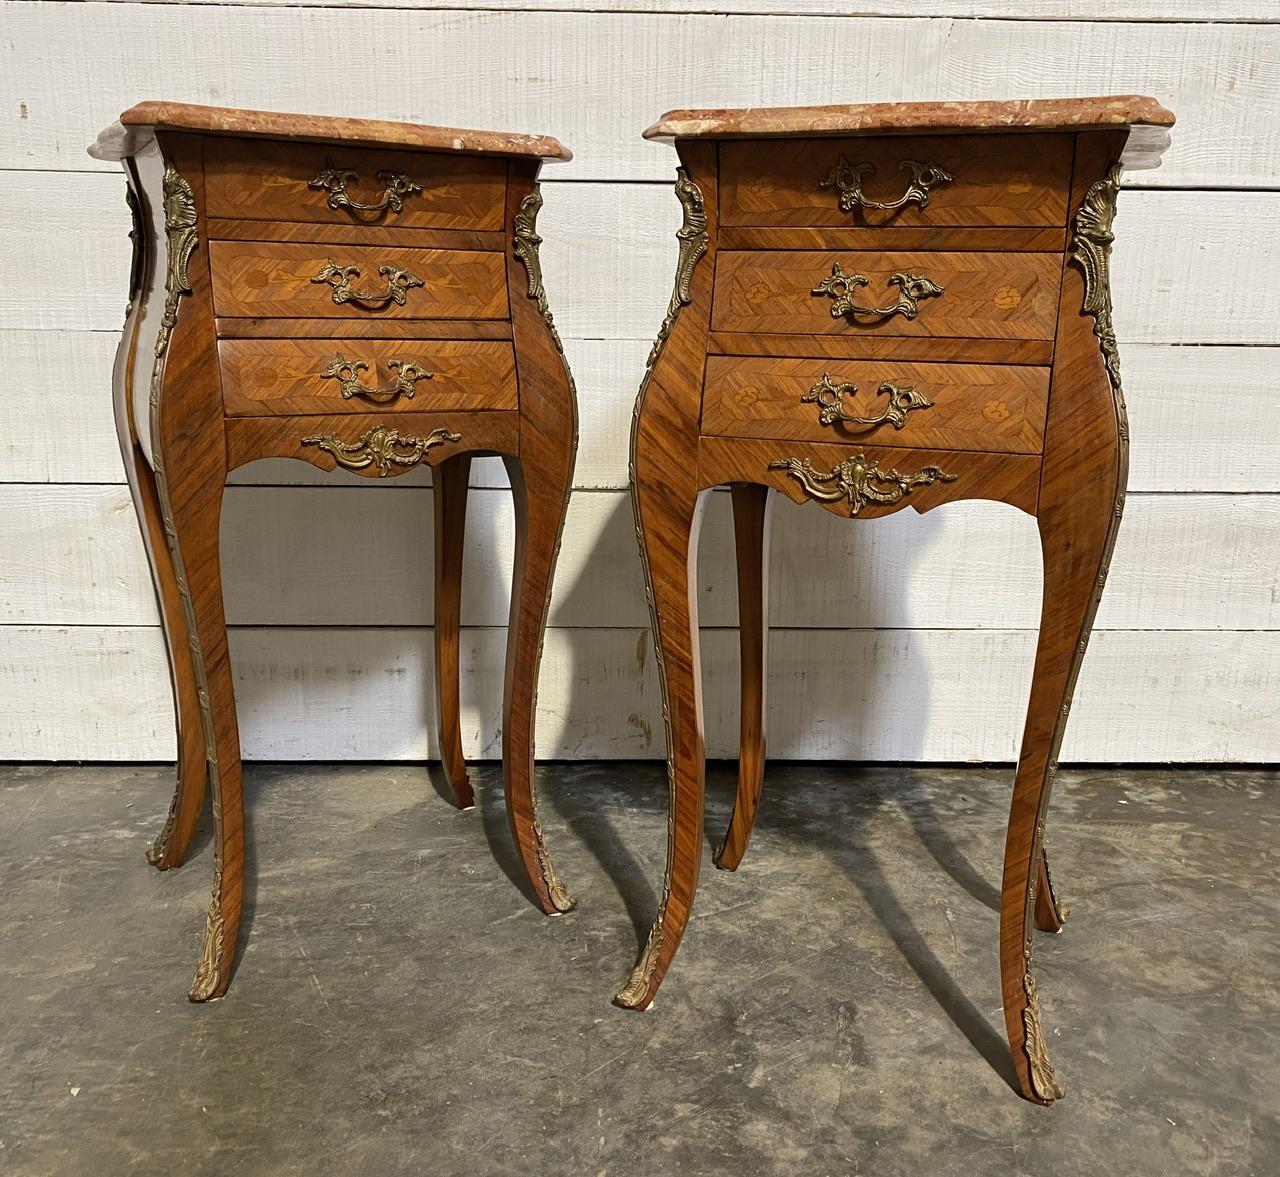 A delightful pair of French Bedside Tables, each having original perfect marble top, 3 smoothly running drawers fitted with original brass handles. Brass mounts on all sides and lovely floral marquetry. They are made from a variety of woods